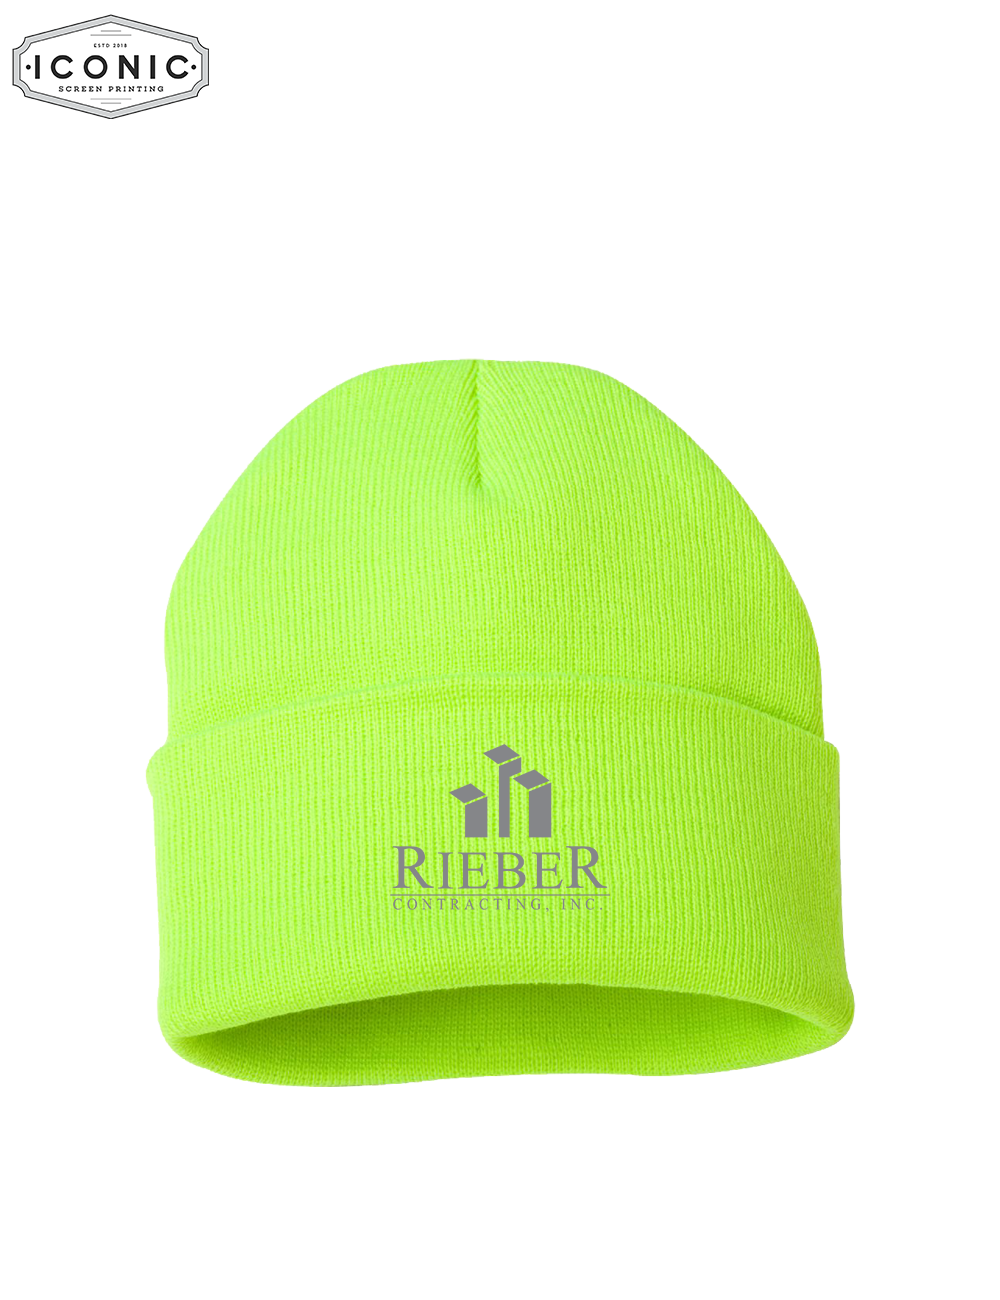 Rieber Contracting - Solid 12" Cuffed Beanie